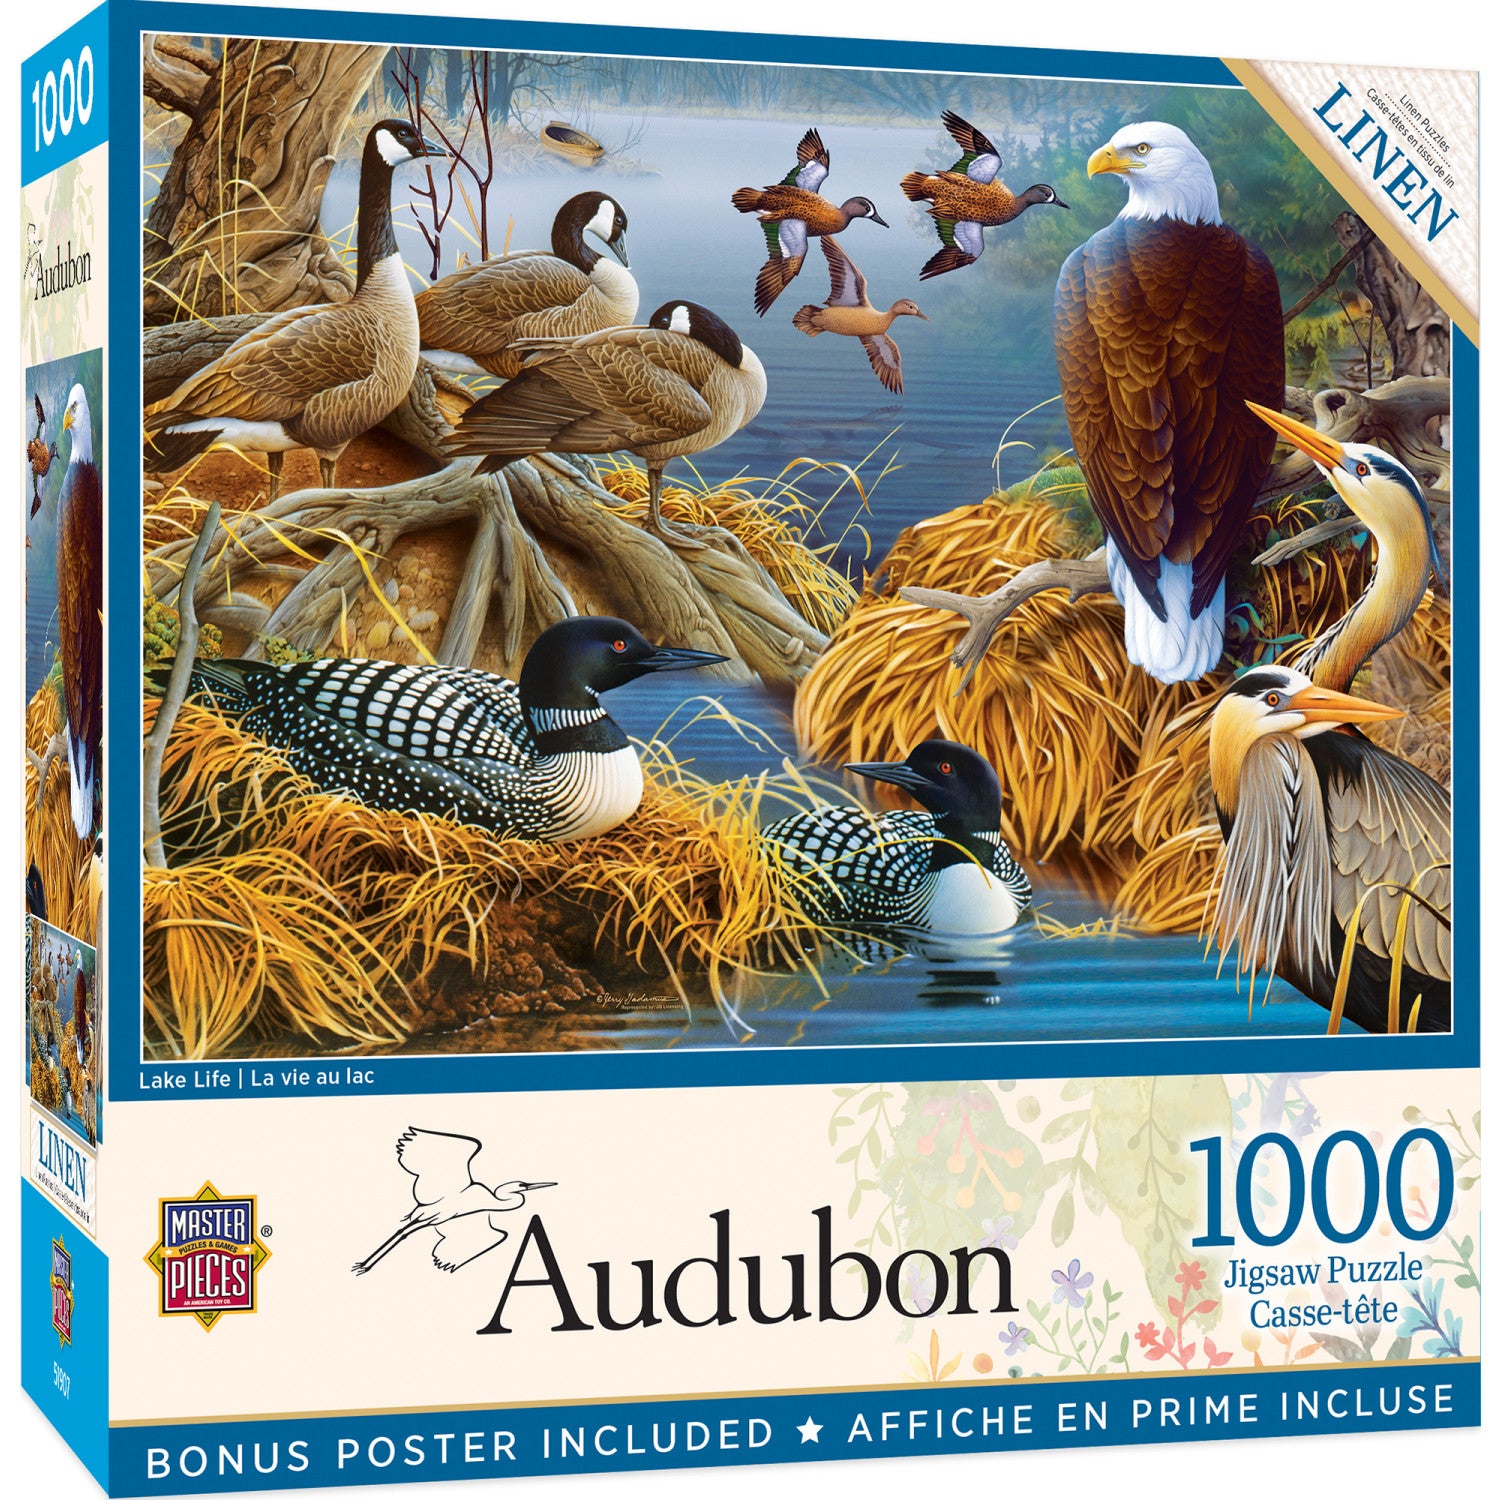 MasterPieces 1000 Piece Jigsaw Puzzle for Adults - Safari - 19.25